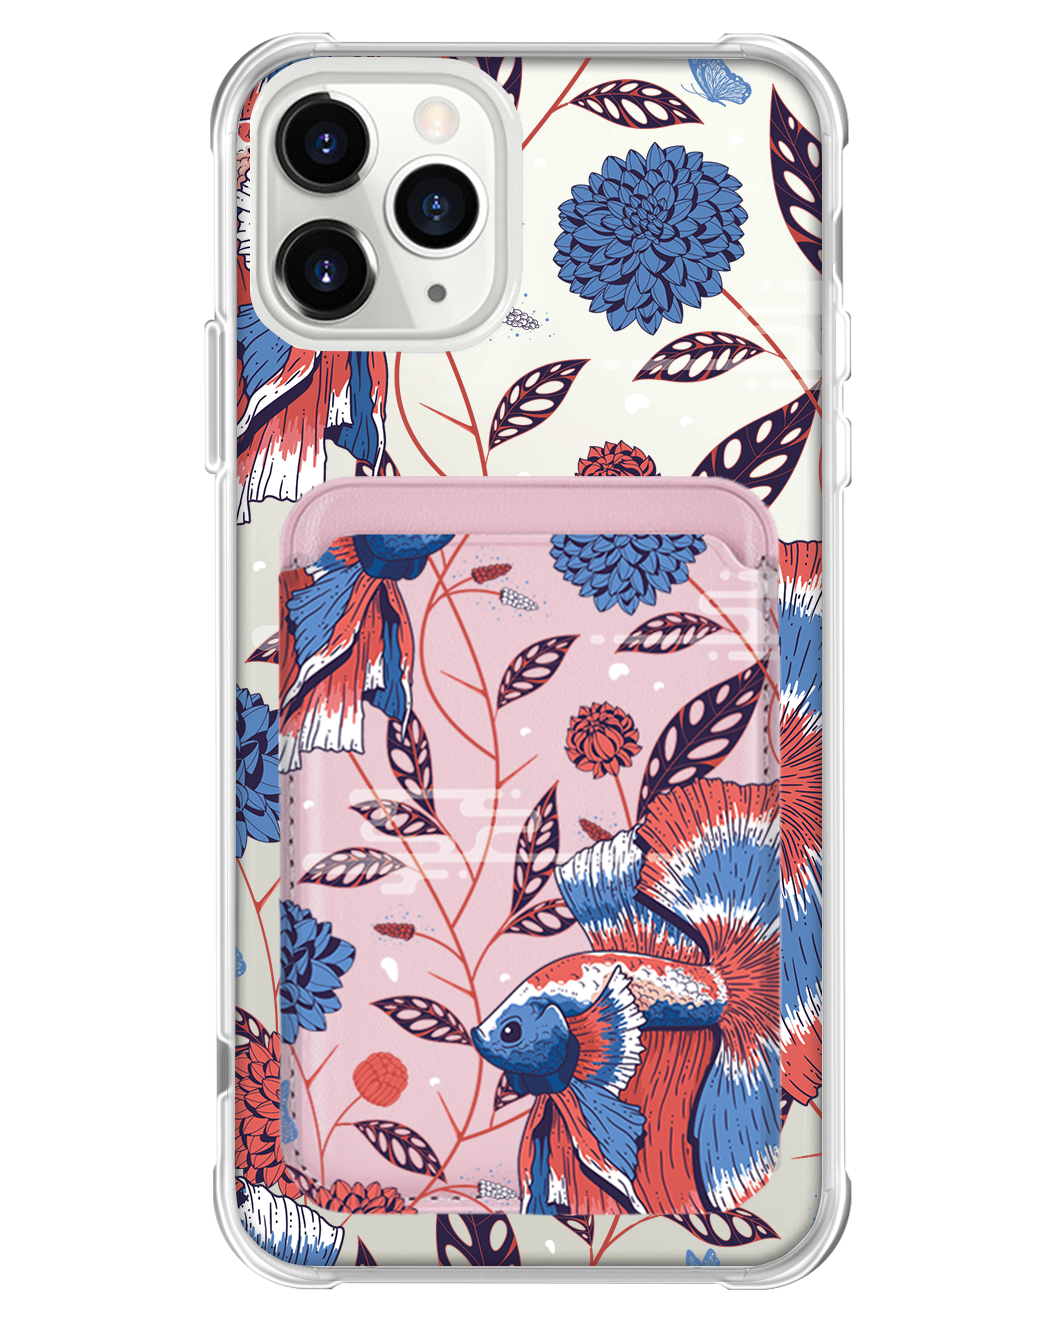 iPhone Magnetic Wallet Case - Fish & Floral 2.0